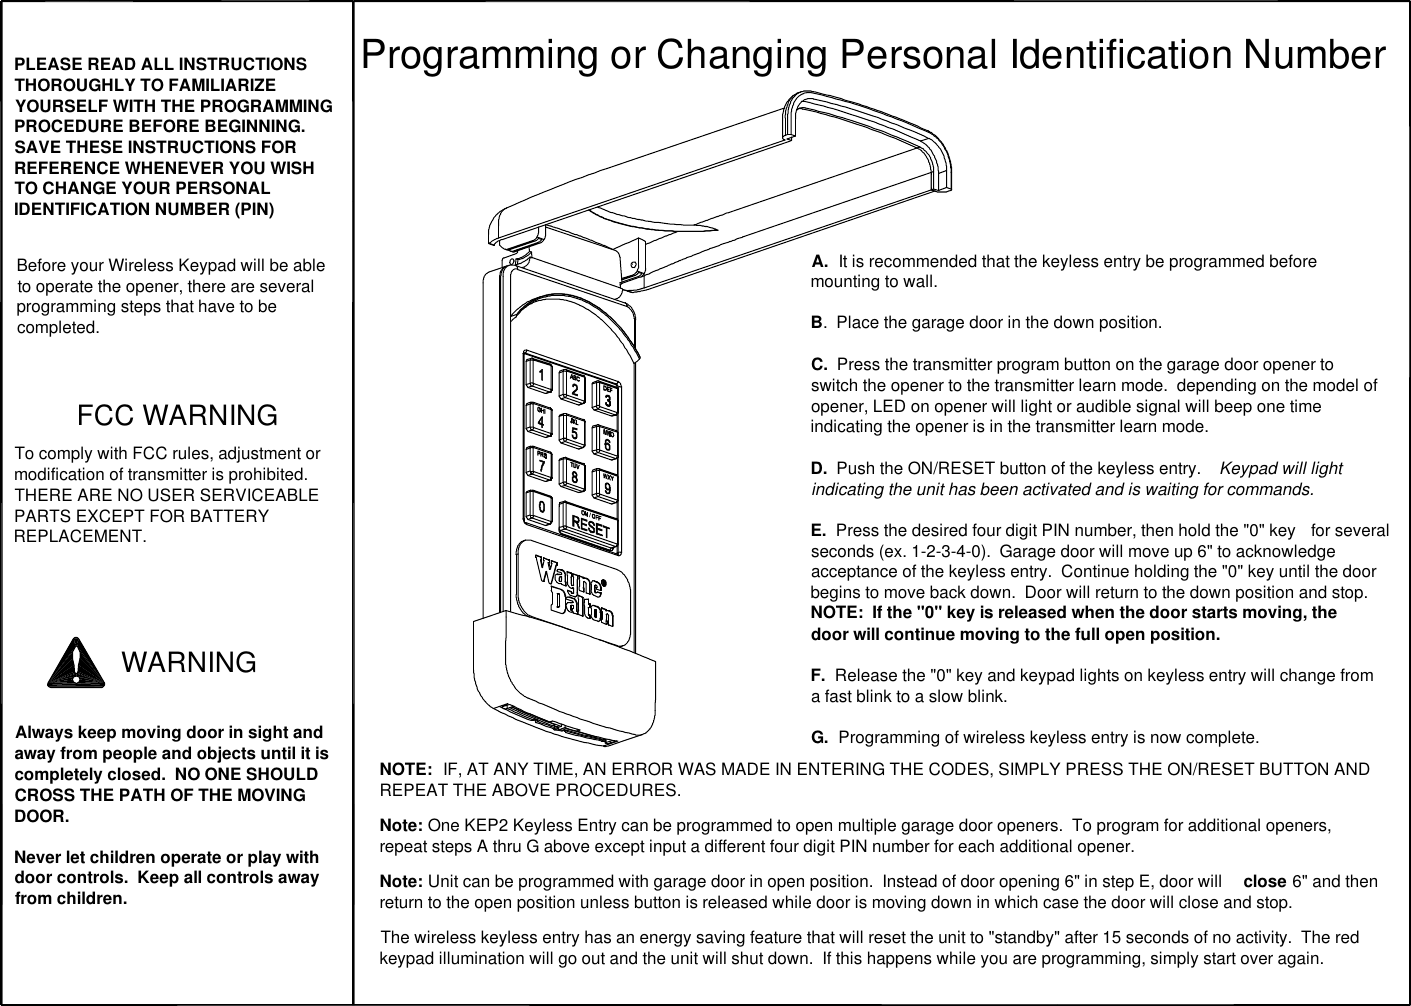 PLEASE READ ALL INSTRUCTIONS THOROUGHLY TO FAMILIARIZE YOURSELF WITH THE PROGRAMMING PROCEDURE BEFORE BEGINNING.  SAVE THESE INSTRUCTIONS FOR REFERENCE WHENEVER YOU WISH TO CHANGE YOUR PERSONAL IDENTIFICATION NUMBER (PIN)Before your Wireless Keypad will be able to operate the opener, there are several programming steps that have to be completed.FCC WARNINGTo comply with FCC rules, adjustment or modification of transmitter is prohibited.  THERE ARE NO USER SERVICEABLE PARTS EXCEPT FOR BATTERY REPLACEMENT.Always keep moving door in sight and away from people and objects until it is completely closed.  NO ONE SHOULD CROSS THE PATH OF THE MOVING DOOR.Never let children operate or play with door controls.  Keep all controls away from children.WARNINGProgramming or Changing Personal Identification NumberA.  It is recommended that the keyless entry be programmed before mounting to wall.B.  Place the garage door in the down position.C.  Press the transmitter program button on the garage door opener to switch the opener to the transmitter learn mode.  depending on the model of opener, LED on opener will light or audible signal will beep one time indicating the opener is in the transmitter learn mode.D.  Push the ON/RESET button of the keyless entry.   Keypad will light indicating the unit has been activated and is waiting for commands.  E.  Press the desired four digit PIN number, then hold the &quot;0&quot; key  for several seconds (ex. 1-2-3-4-0).  Garage door will move up 6&quot; to acknowledge acceptance of the keyless entry.  Continue holding the &quot;0&quot; key until the door begins to move back down.  Door will return to the down position and stop.NOTE:  If the &quot;0&quot; key is released when the door starts moving, the door will continue moving to the full open position.   F.  Release the &quot;0&quot; key and keypad lights on keyless entry will change from a fast blink to a slow blink.  G.  Programming of wireless keyless entry is now complete.NOTE:  IF, AT ANY TIME, AN ERROR WAS MADE IN ENTERING THE CODES, SIMPLY PRESS THE ON/RESET BUTTON AND REPEAT THE ABOVE PROCEDURES.  Note: One KEP2 Keyless Entry can be programmed to open multiple garage door openers.  To program for additional openers, repeat steps A thru G above except input a different four digit PIN number for each additional opener.   Note: Unit can be programmed with garage door in open position.  Instead of door opening 6&quot; in step E, door will  close 6&quot; and then return to the open position unless button is released while door is moving down in which case the door will close and stop.   The wireless keyless entry has an energy saving feature that will reset the unit to &quot;standby&quot; after 15 seconds of no activity.  The red keypad illumination will go out and the unit will shut down.  If this happens while you are programming, simply start over again.